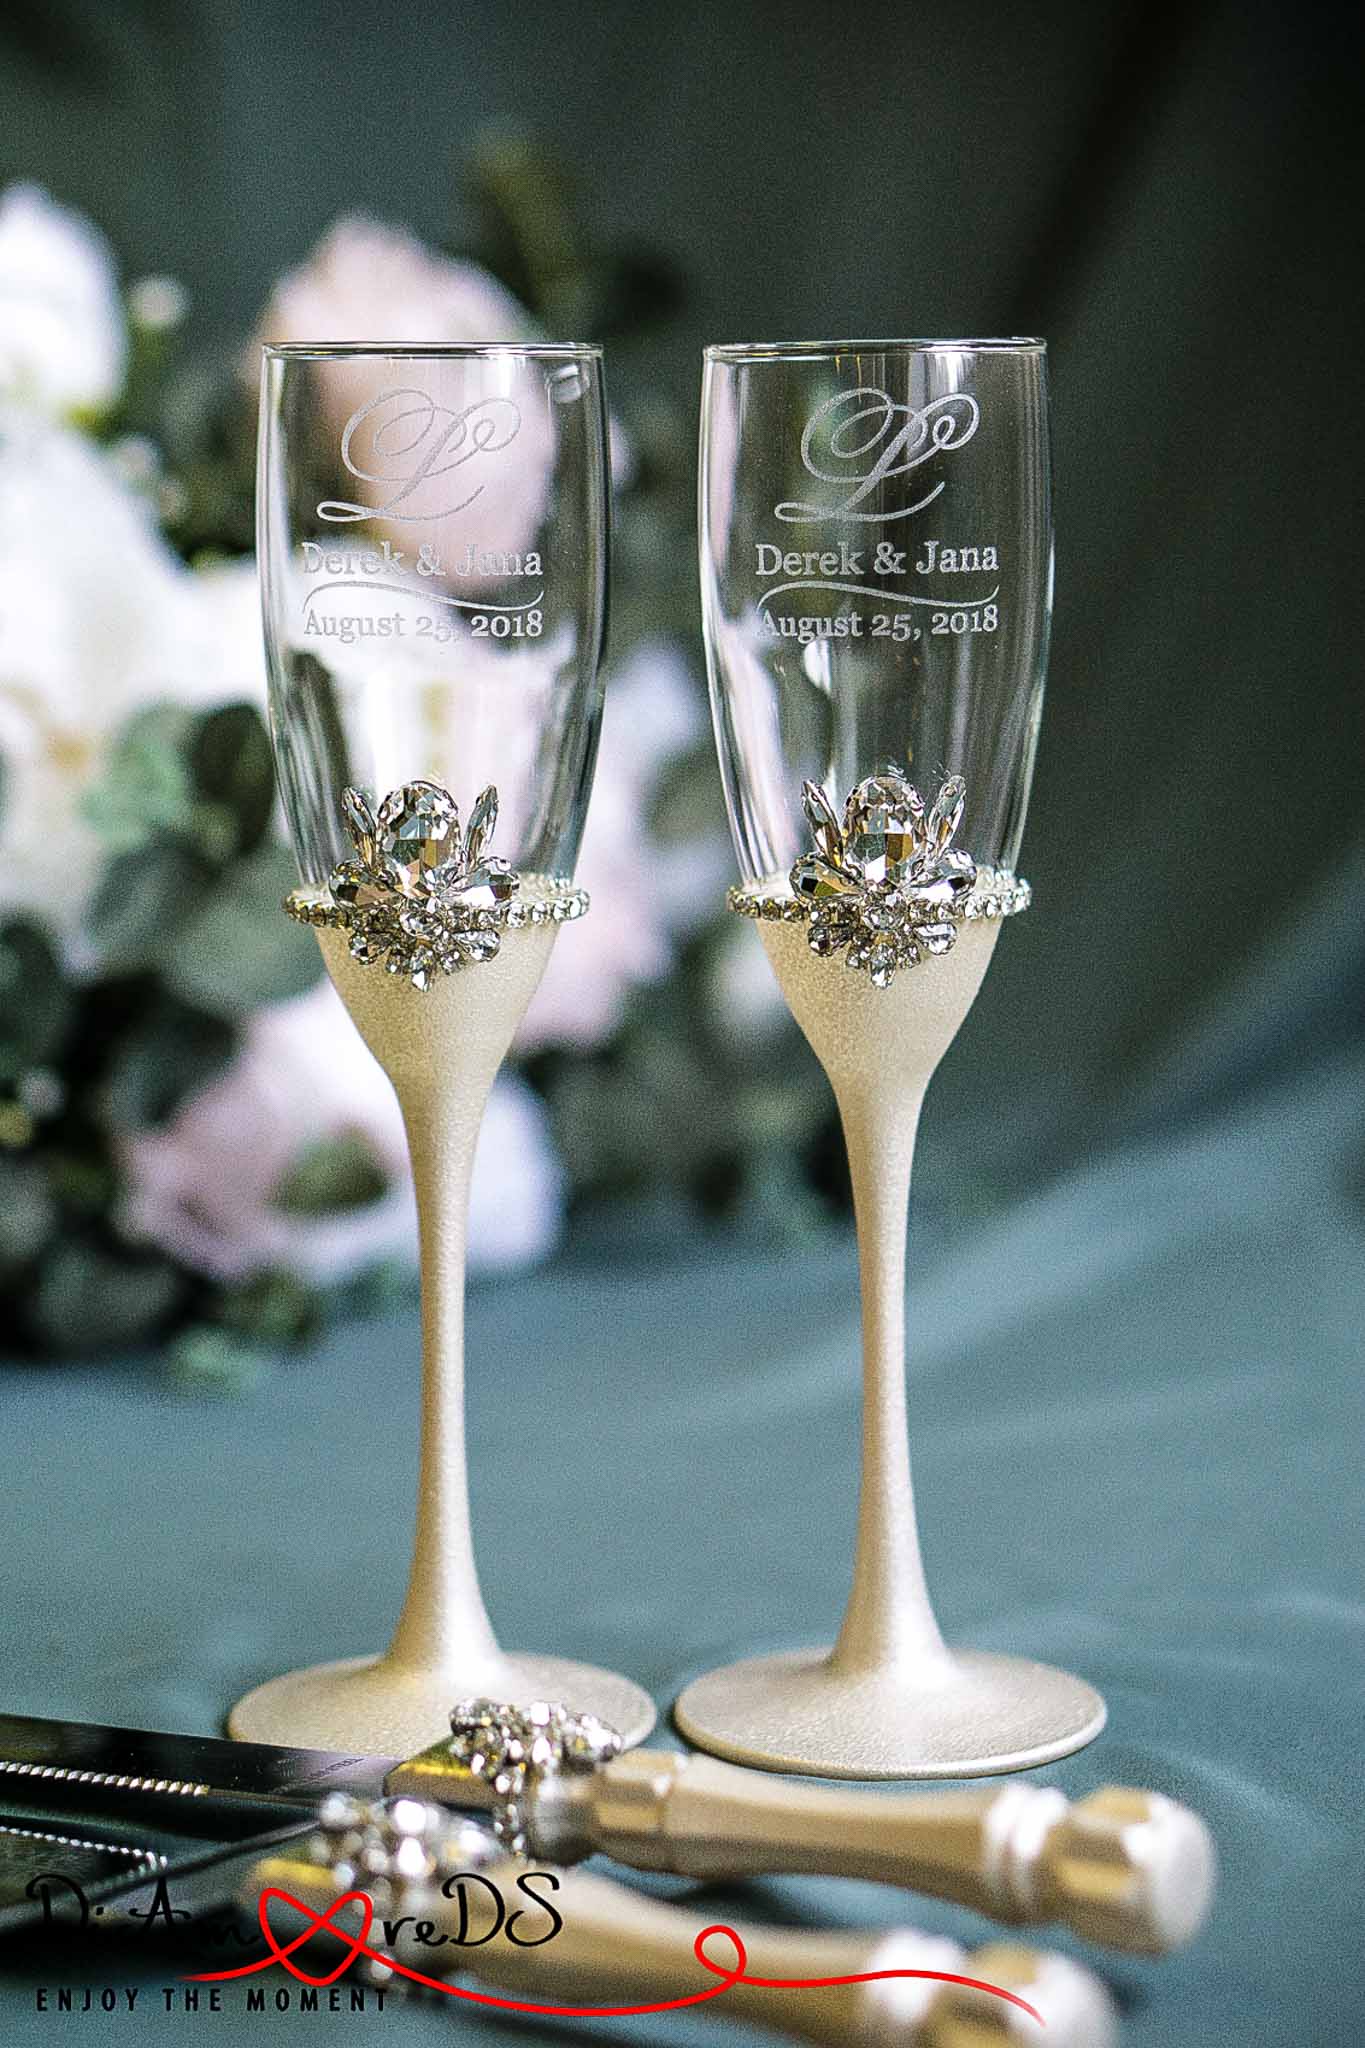 Handcrafted wedding flutes and cake utensils